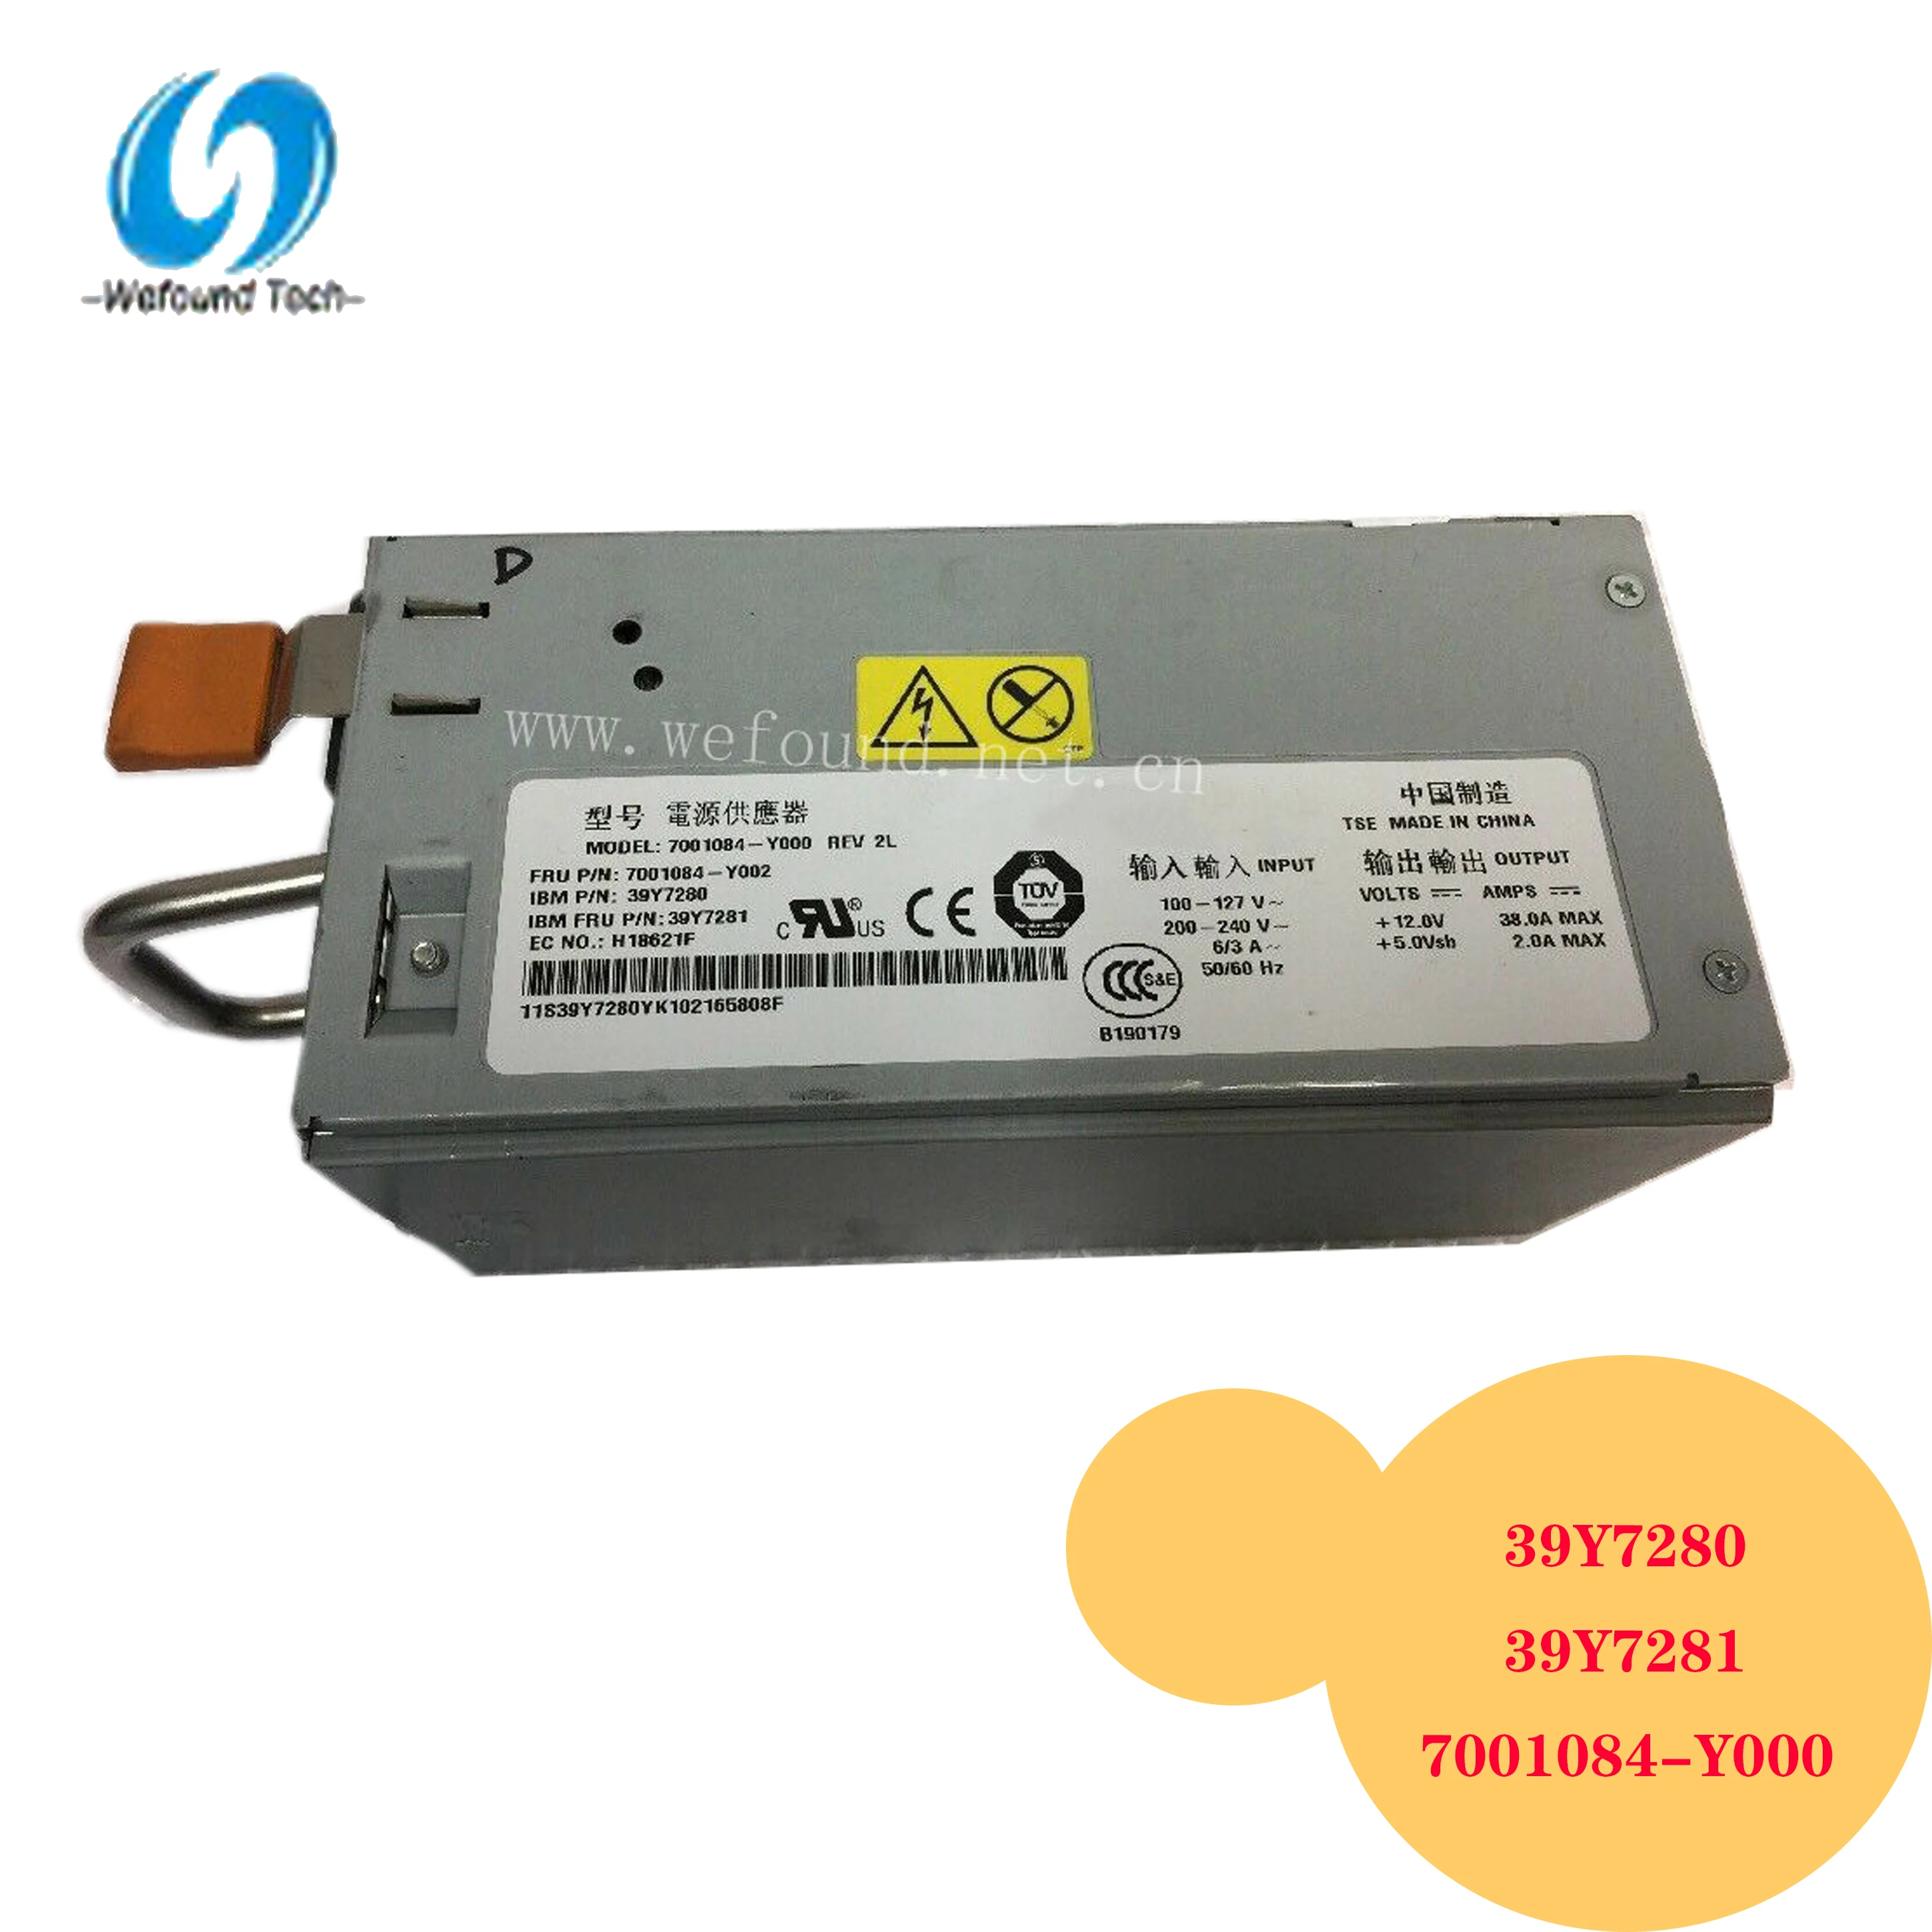 For Sever power supply for X206M X3200 39Y7280 39Y7281 7001084-Y000 Tested Before Shipping